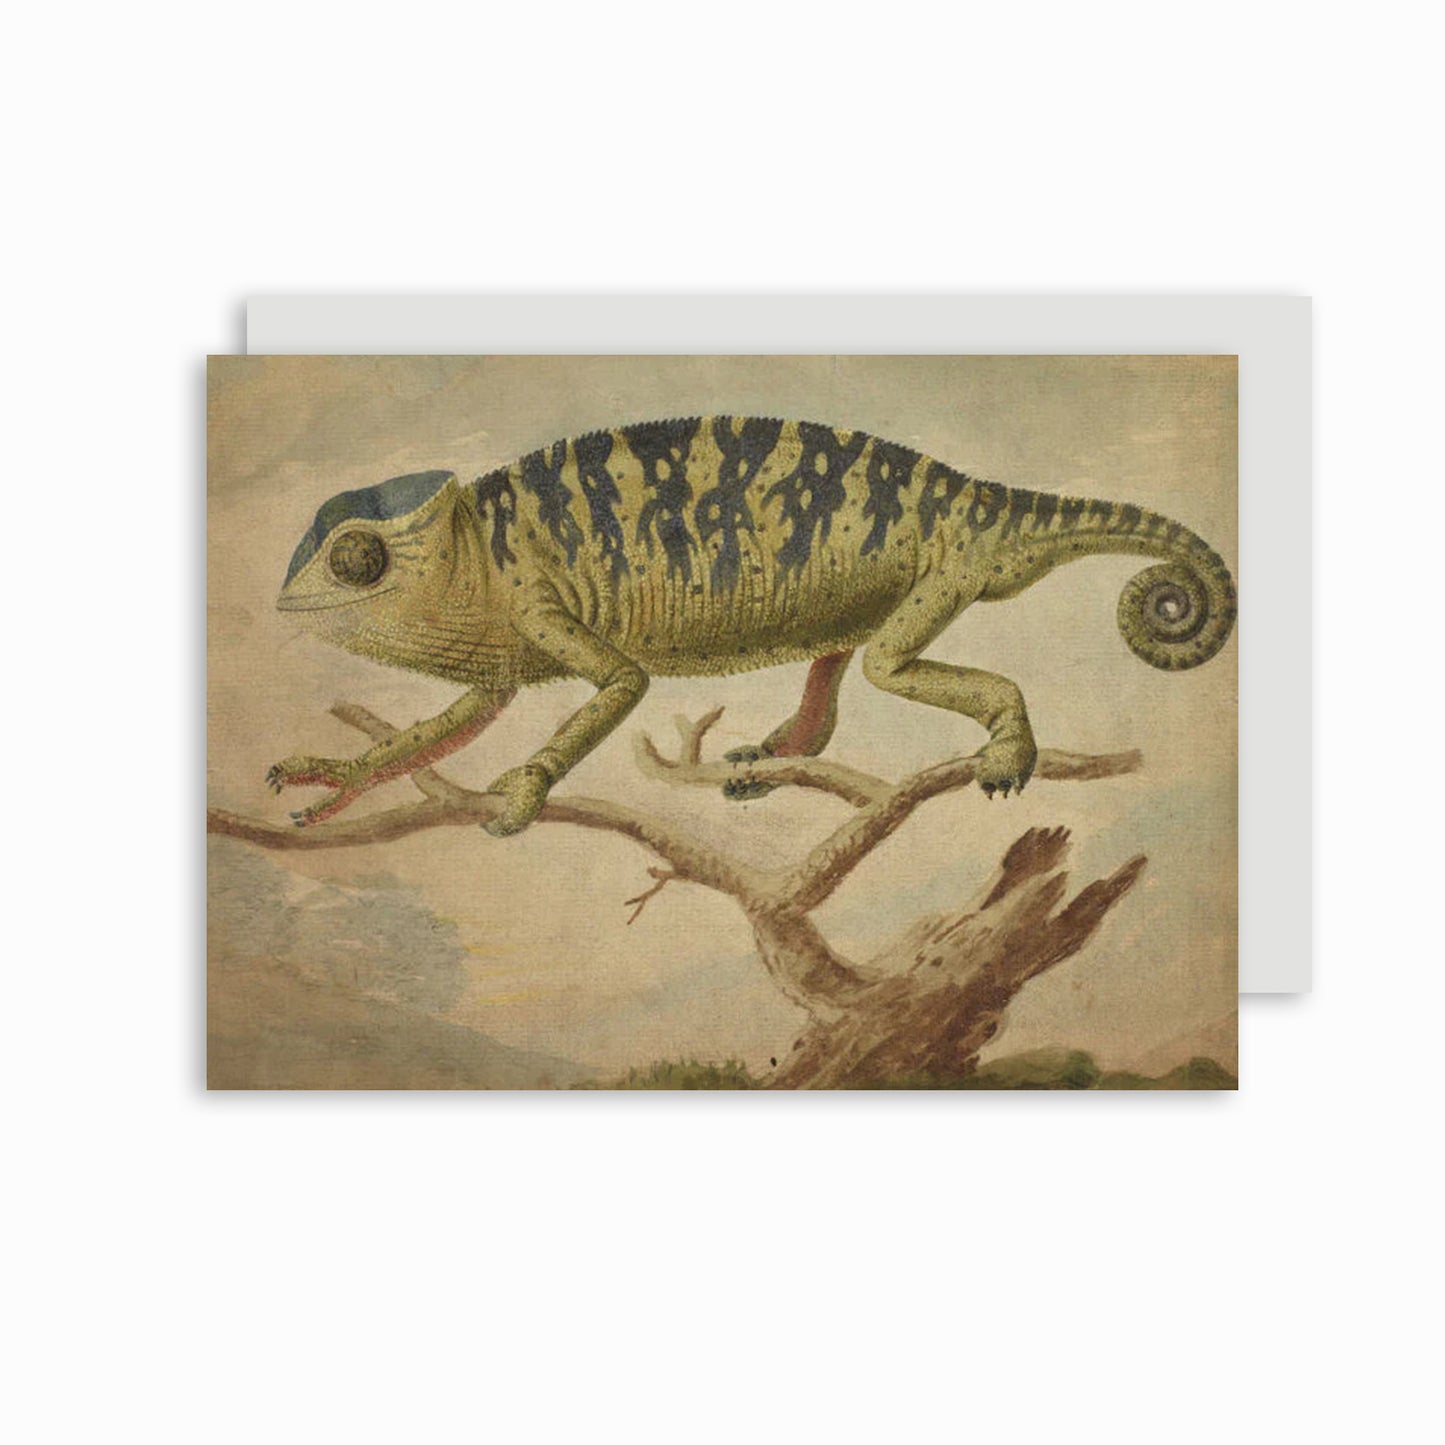 A Chameleon - Greeting card